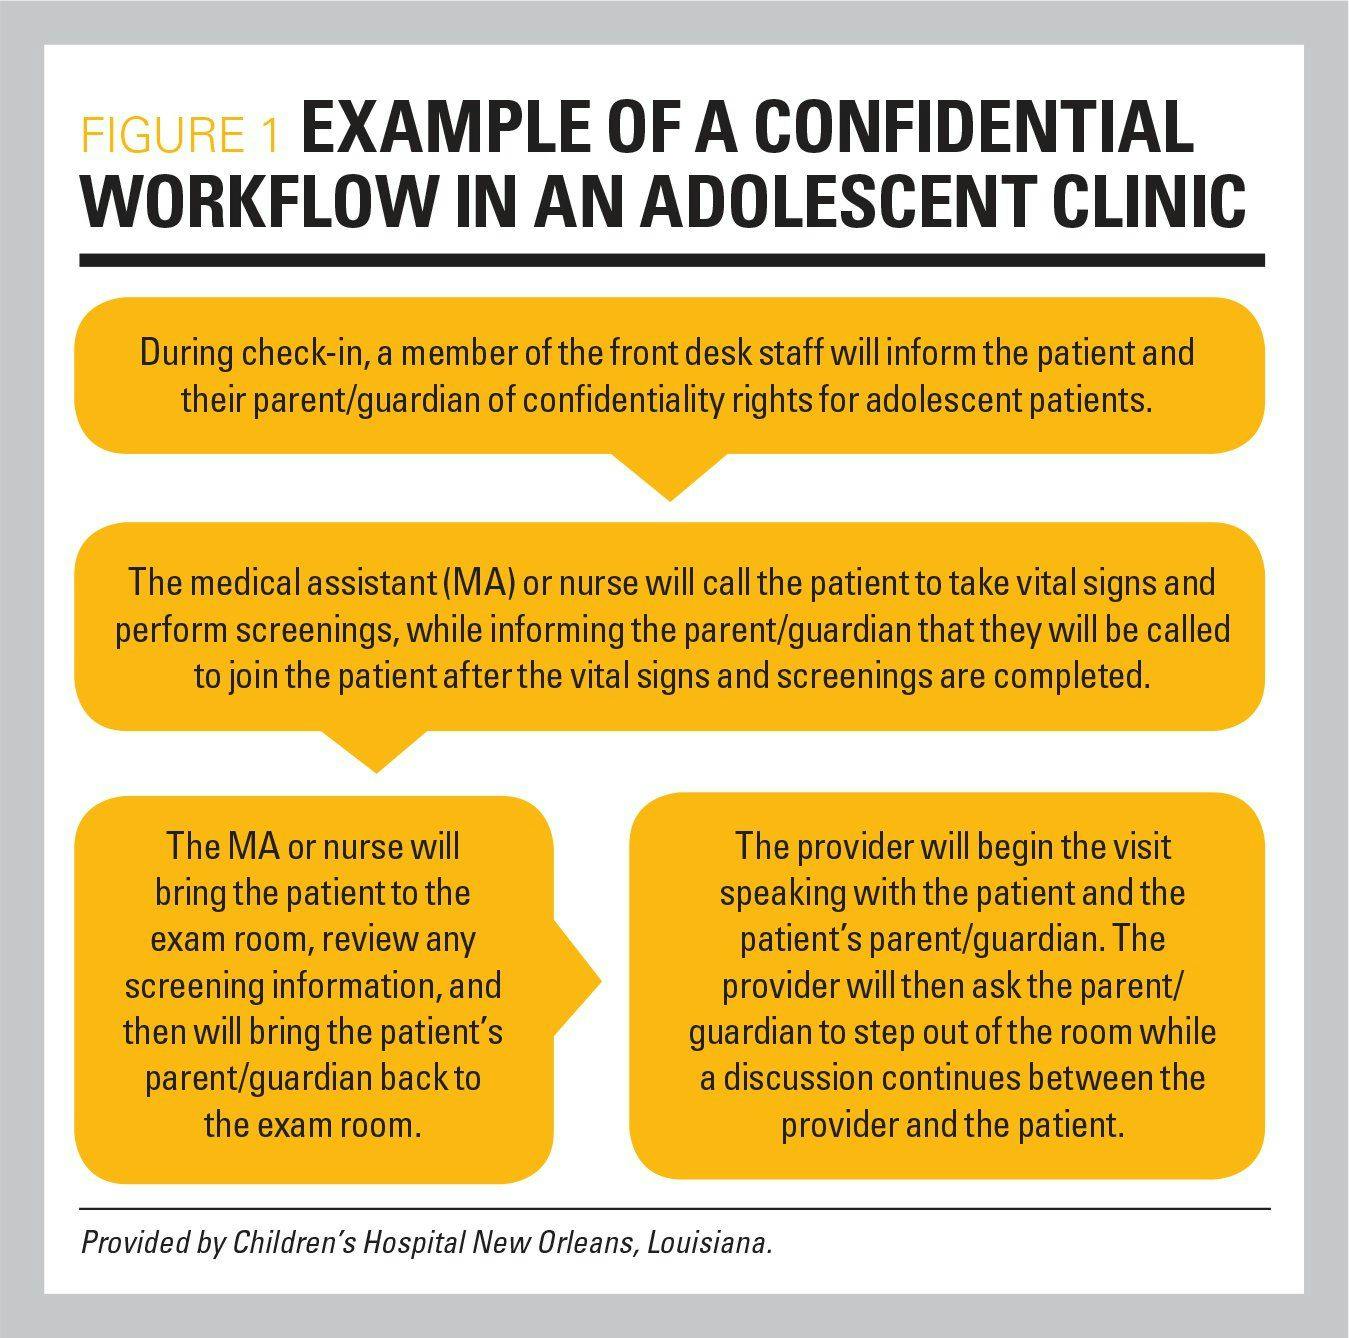 Example of a confidential workflow in an adolescent clinic